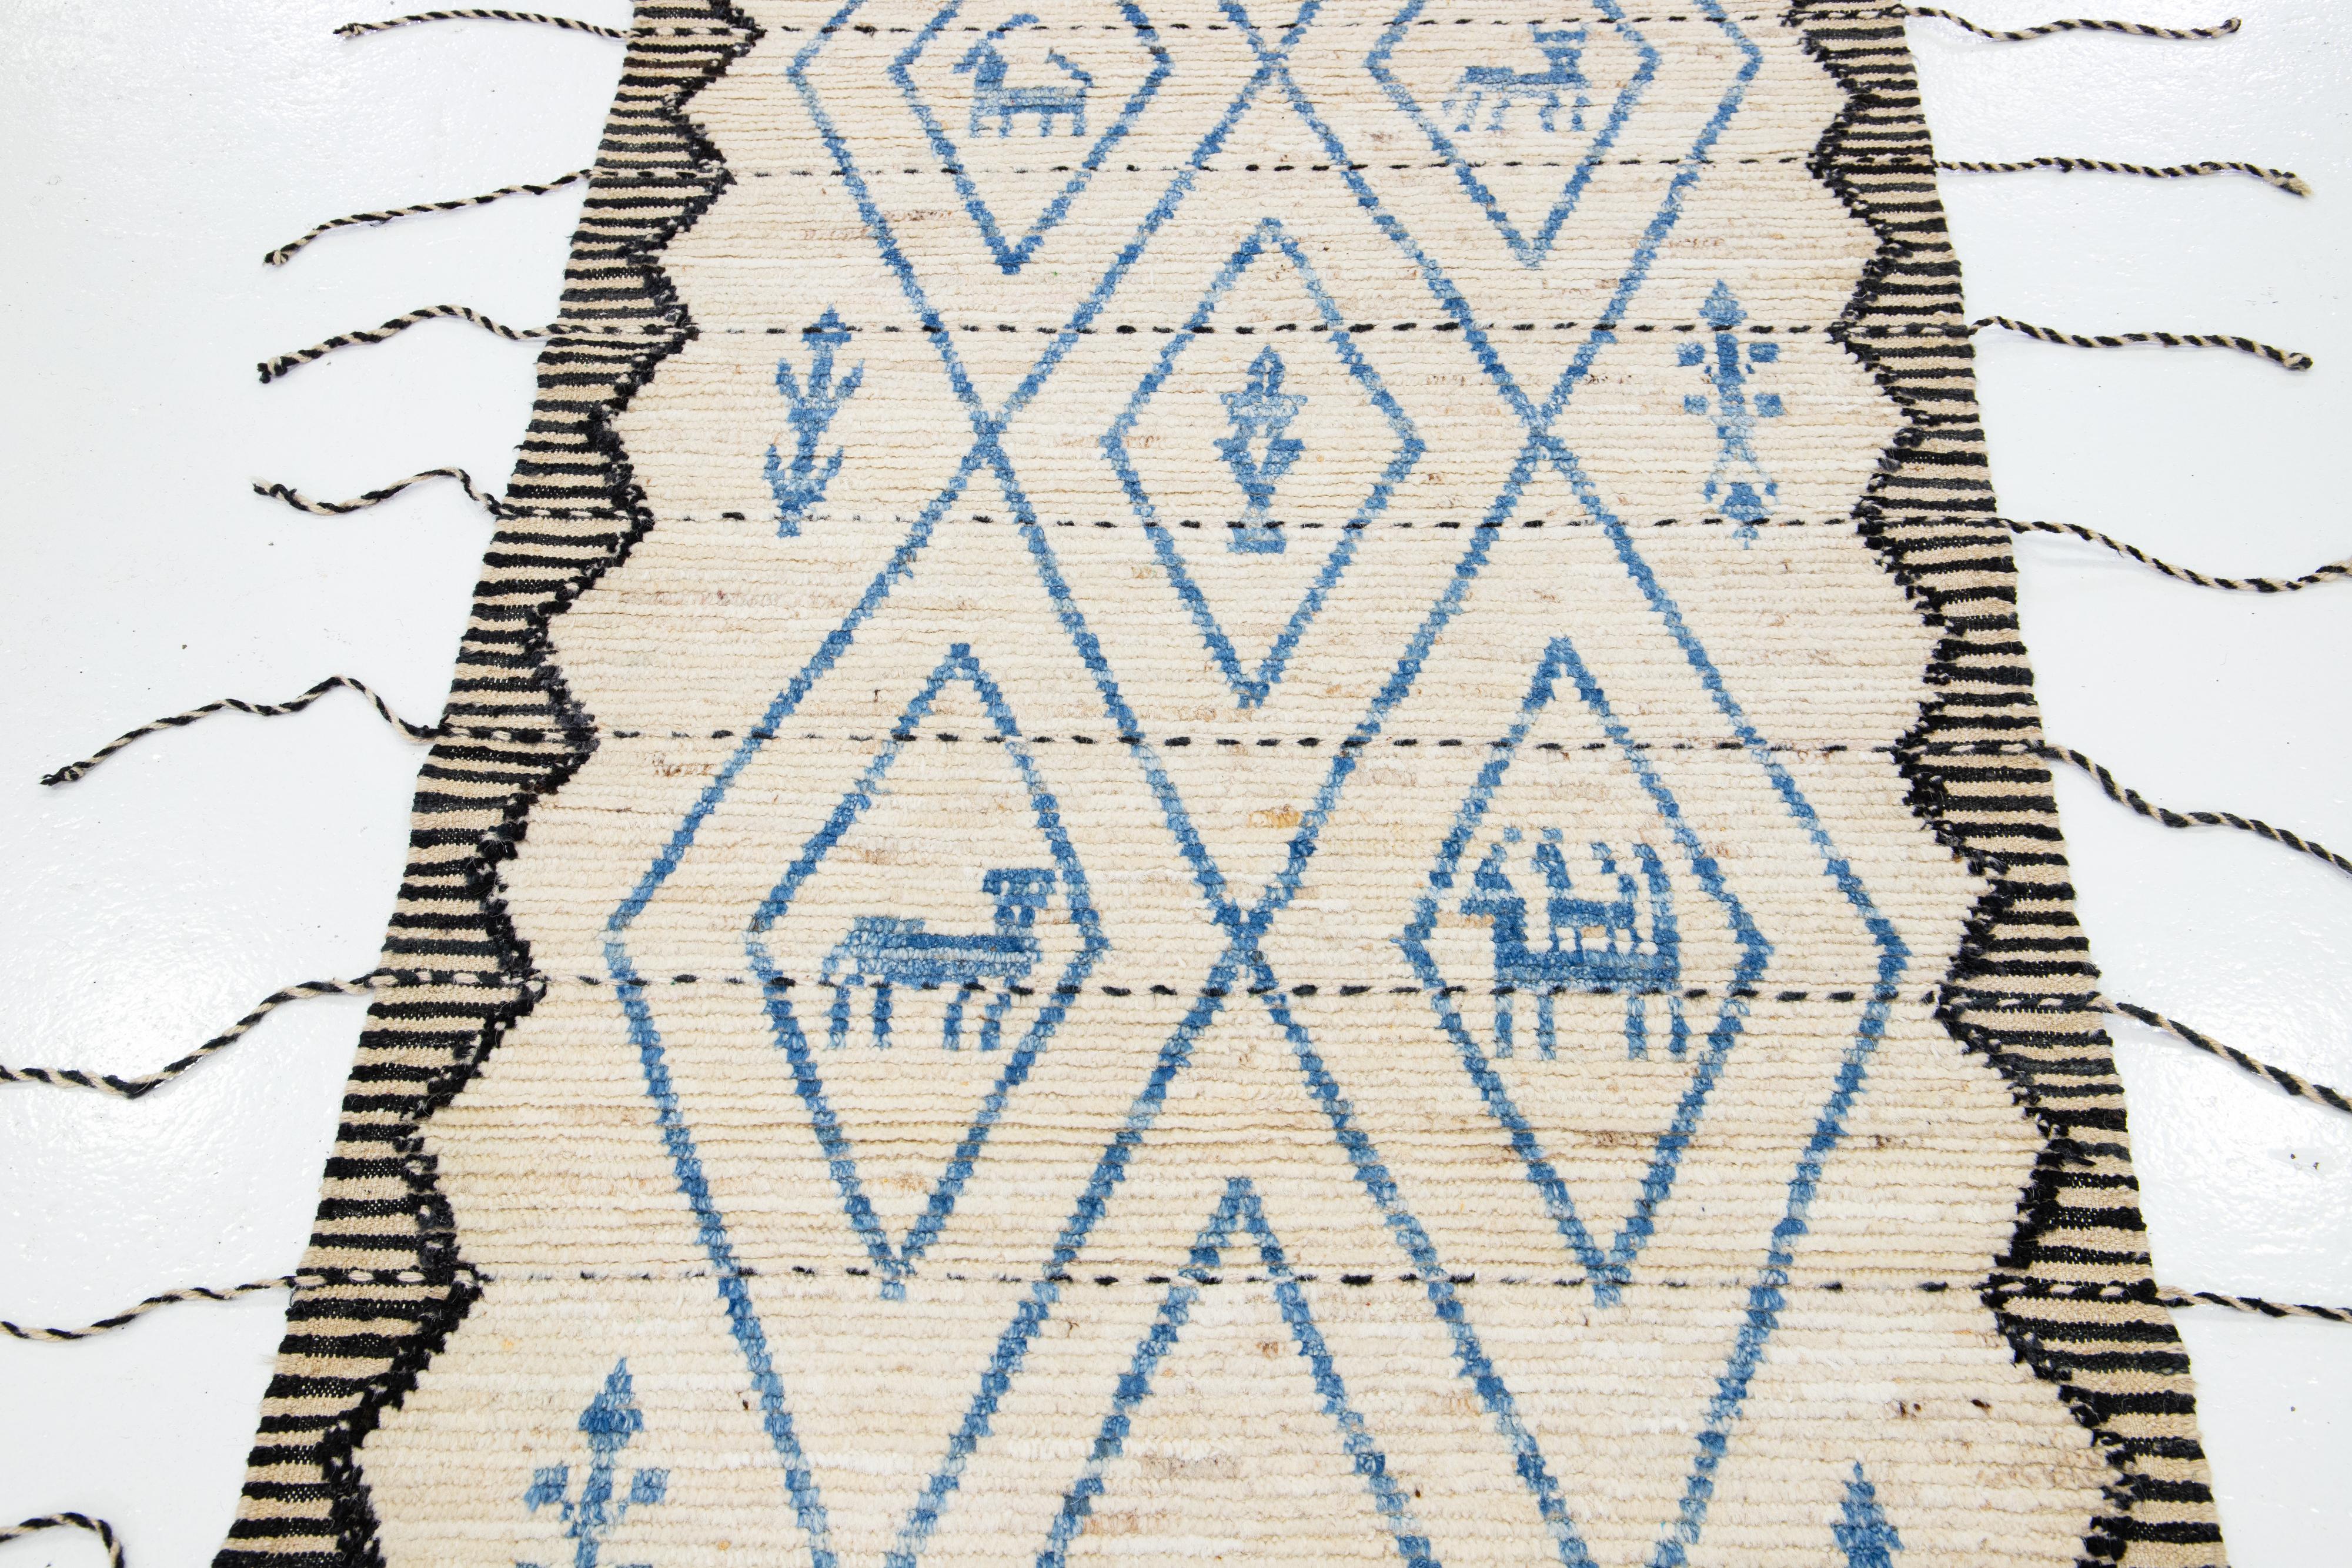 This handcrafted wool runner exhibits a captivating Moroccan pattern. Its modern allure is reflected through a tribal motif, beautifully blending black and blue hues against a mesmerizing beige backdrop.

This rug measures 3'6